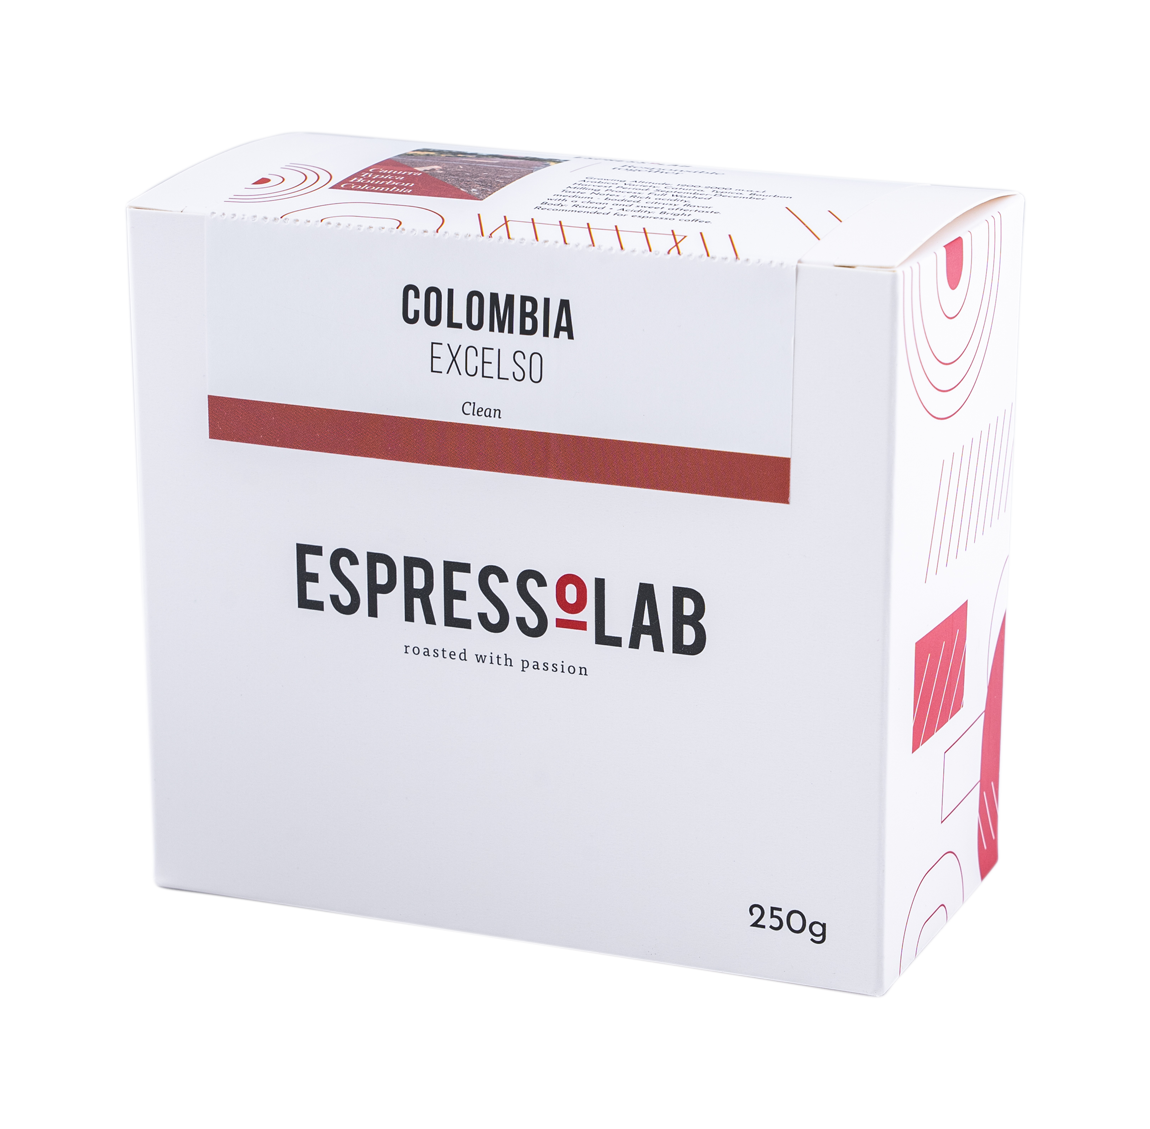 Colombia Excelso 250g